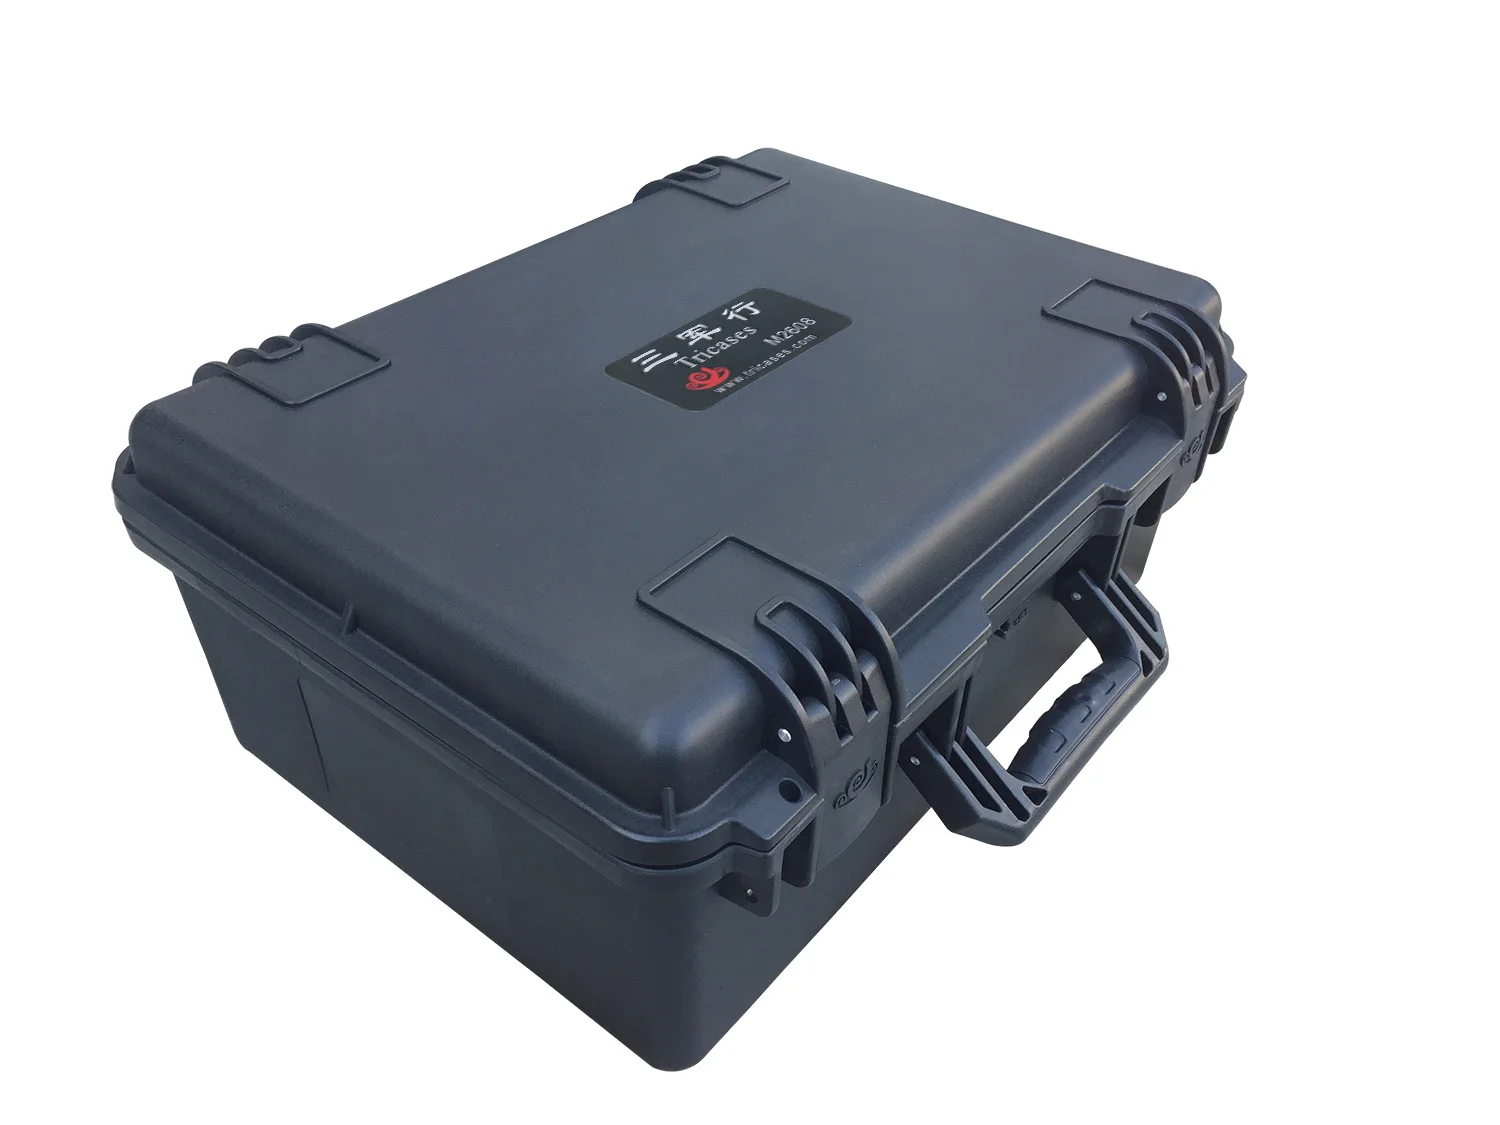 Tricases hard case M2620 with Ronin-m padding foam